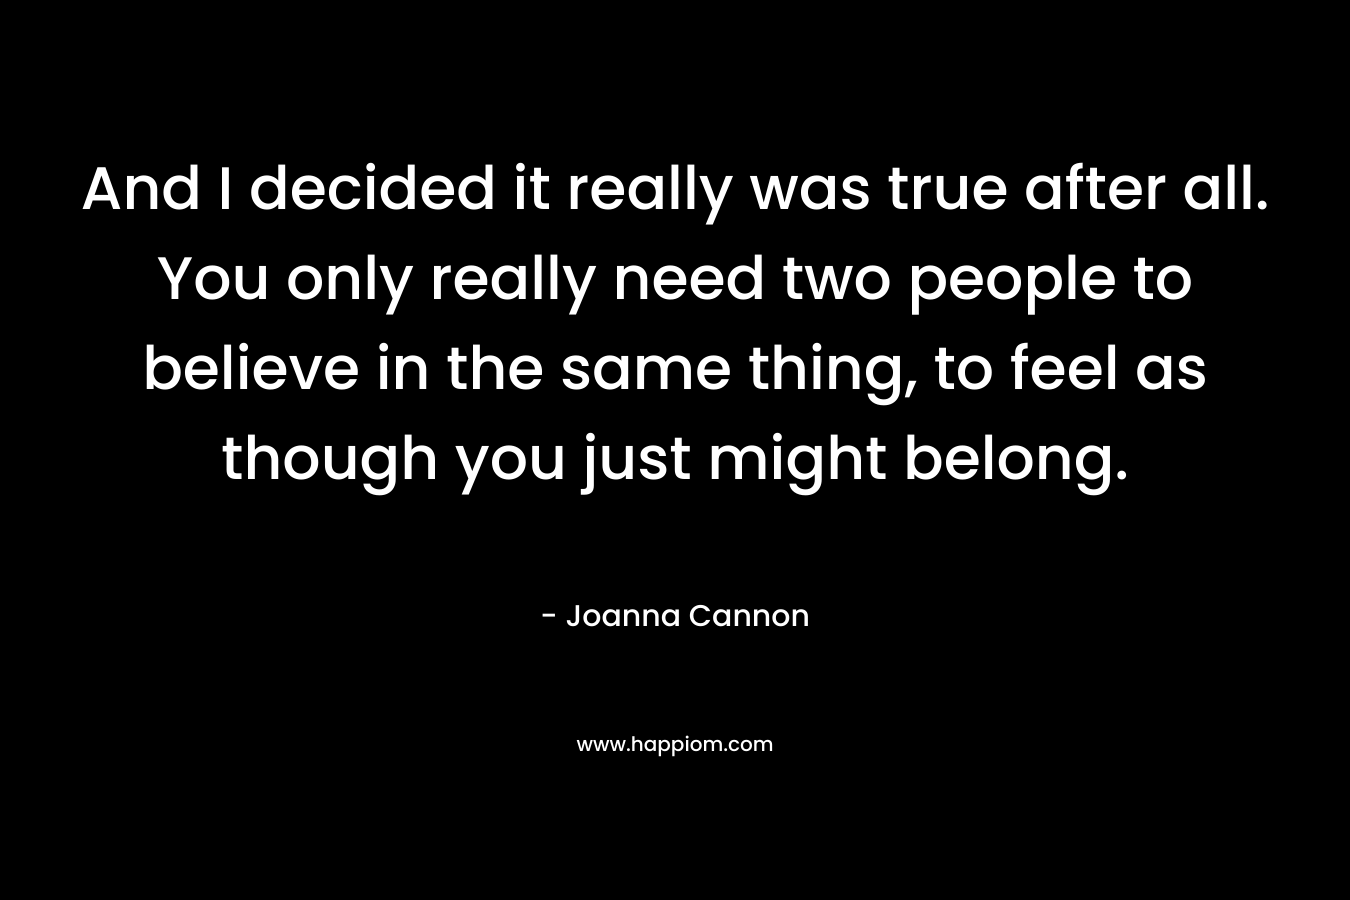 And I decided it really was true after all. You only really need two people to believe in the same thing, to feel as though you just might belong. – Joanna Cannon